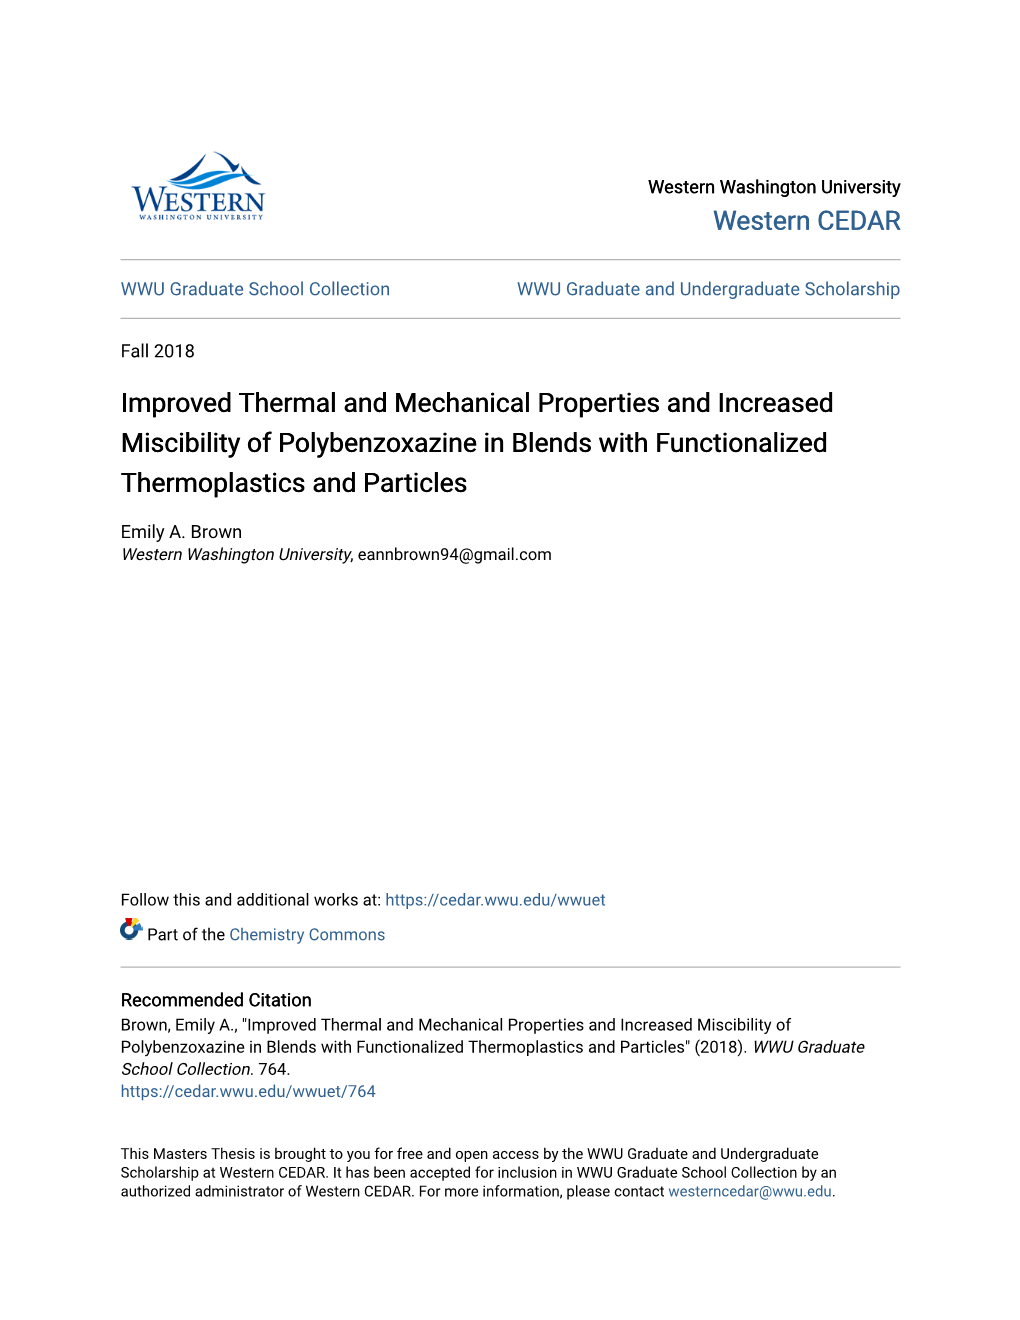 Improved Thermal and Mechanical Properties and Increased Miscibility of Polybenzoxazine in Blends with Functionalized Thermoplastics and Particles